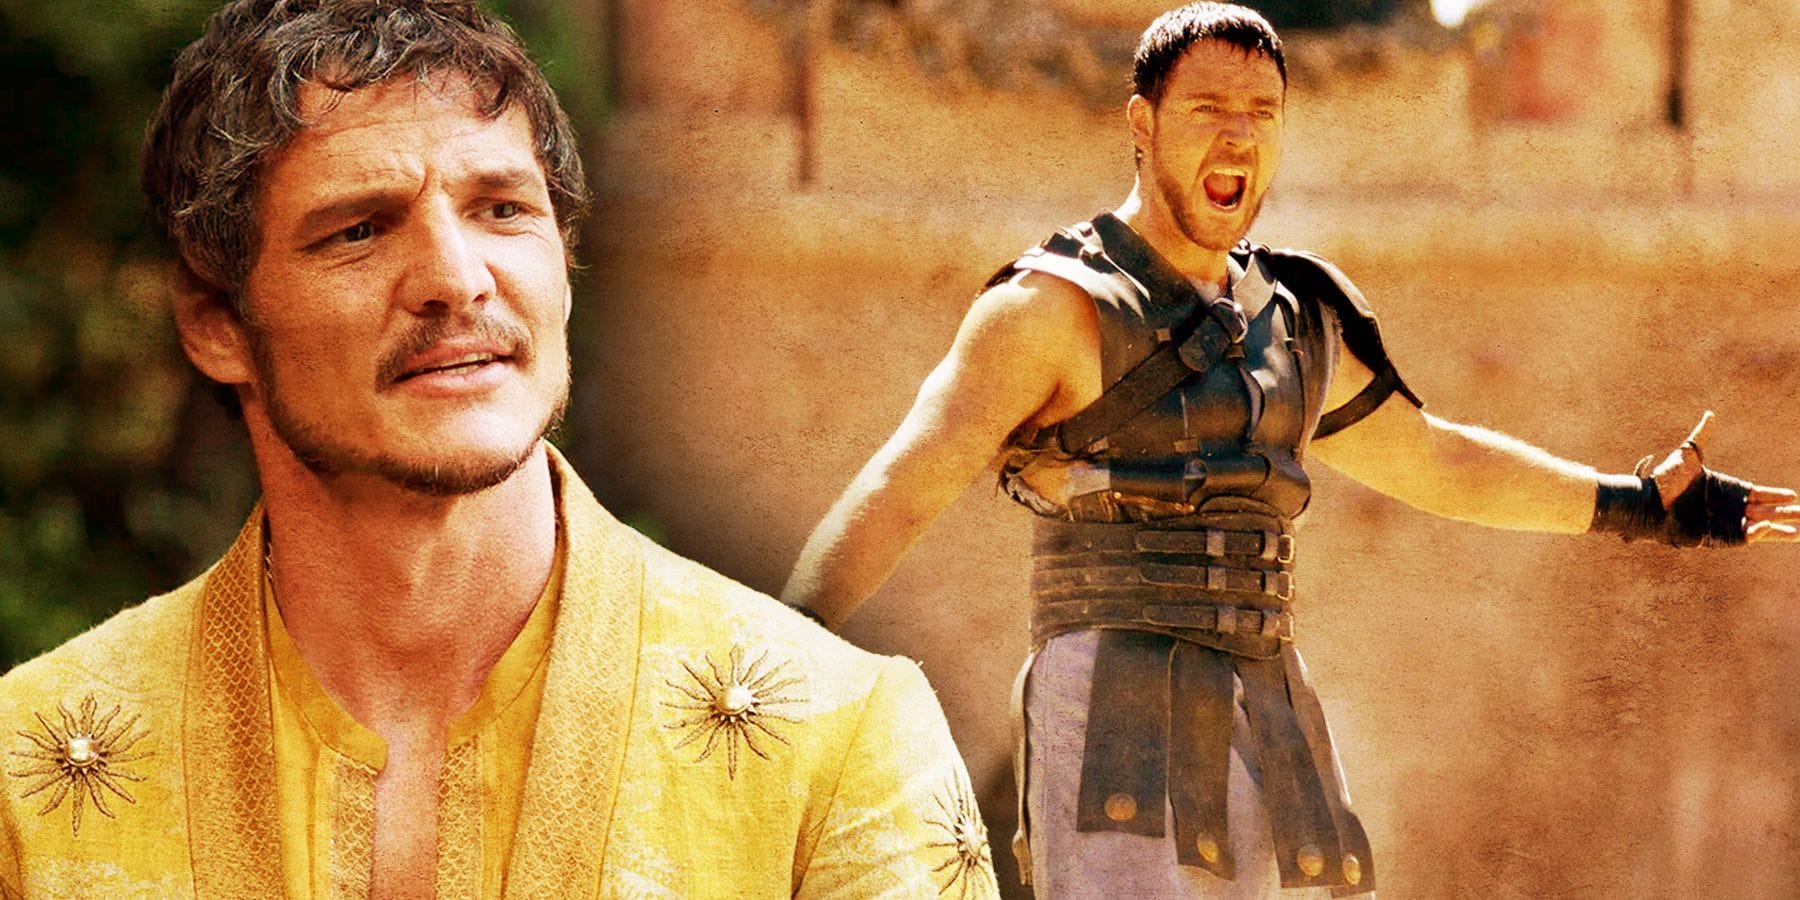 Gladiator 2 Promises Epic Action Sequences According to Paramount Pictures